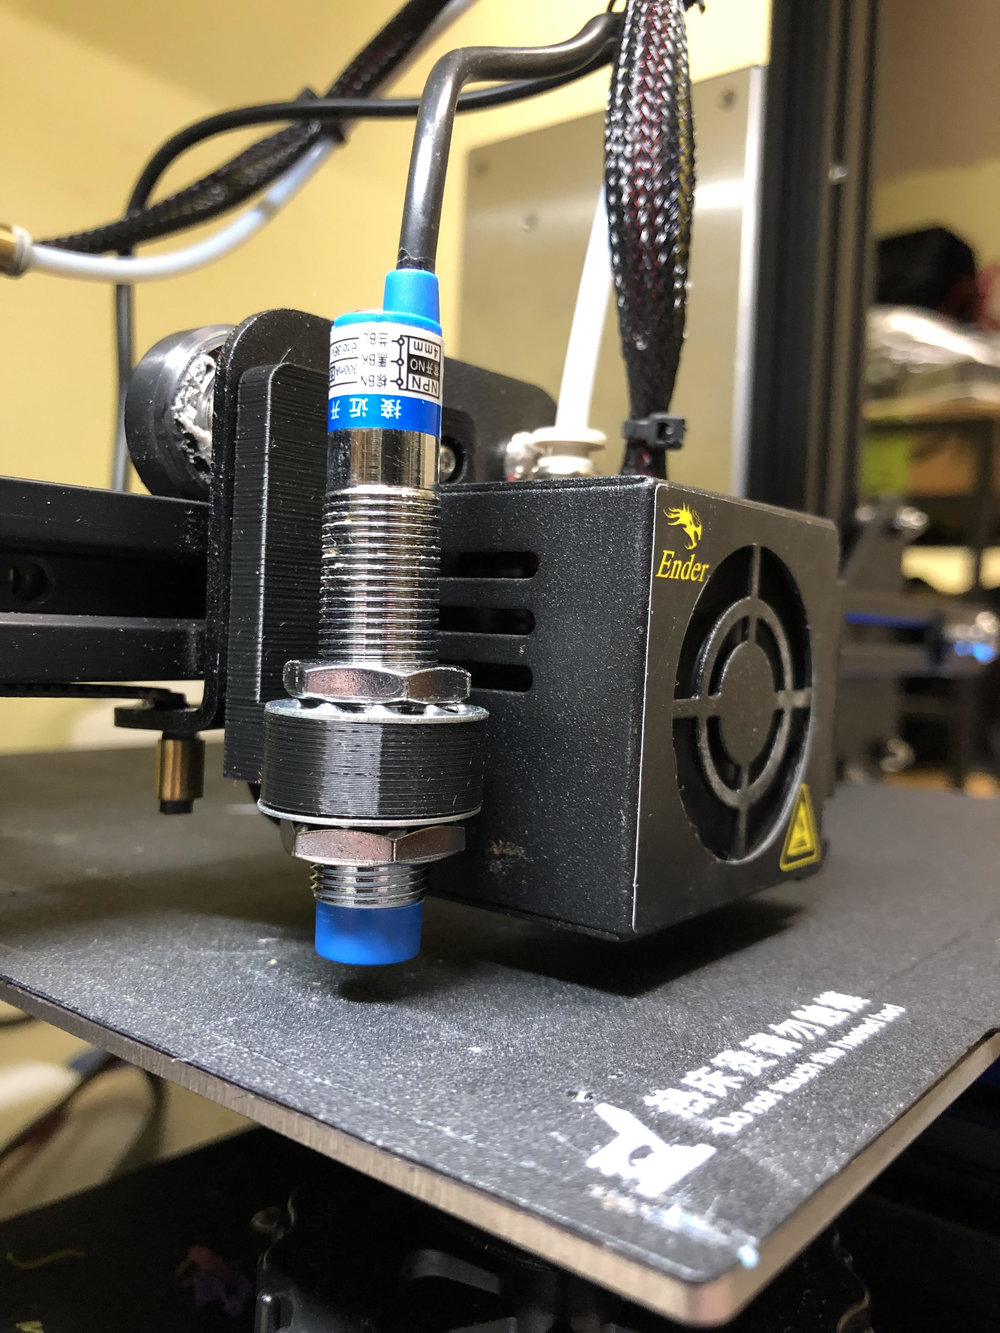 How to Level Your 3D Printer Bed Nozzle Height Calibration for the Best Printing